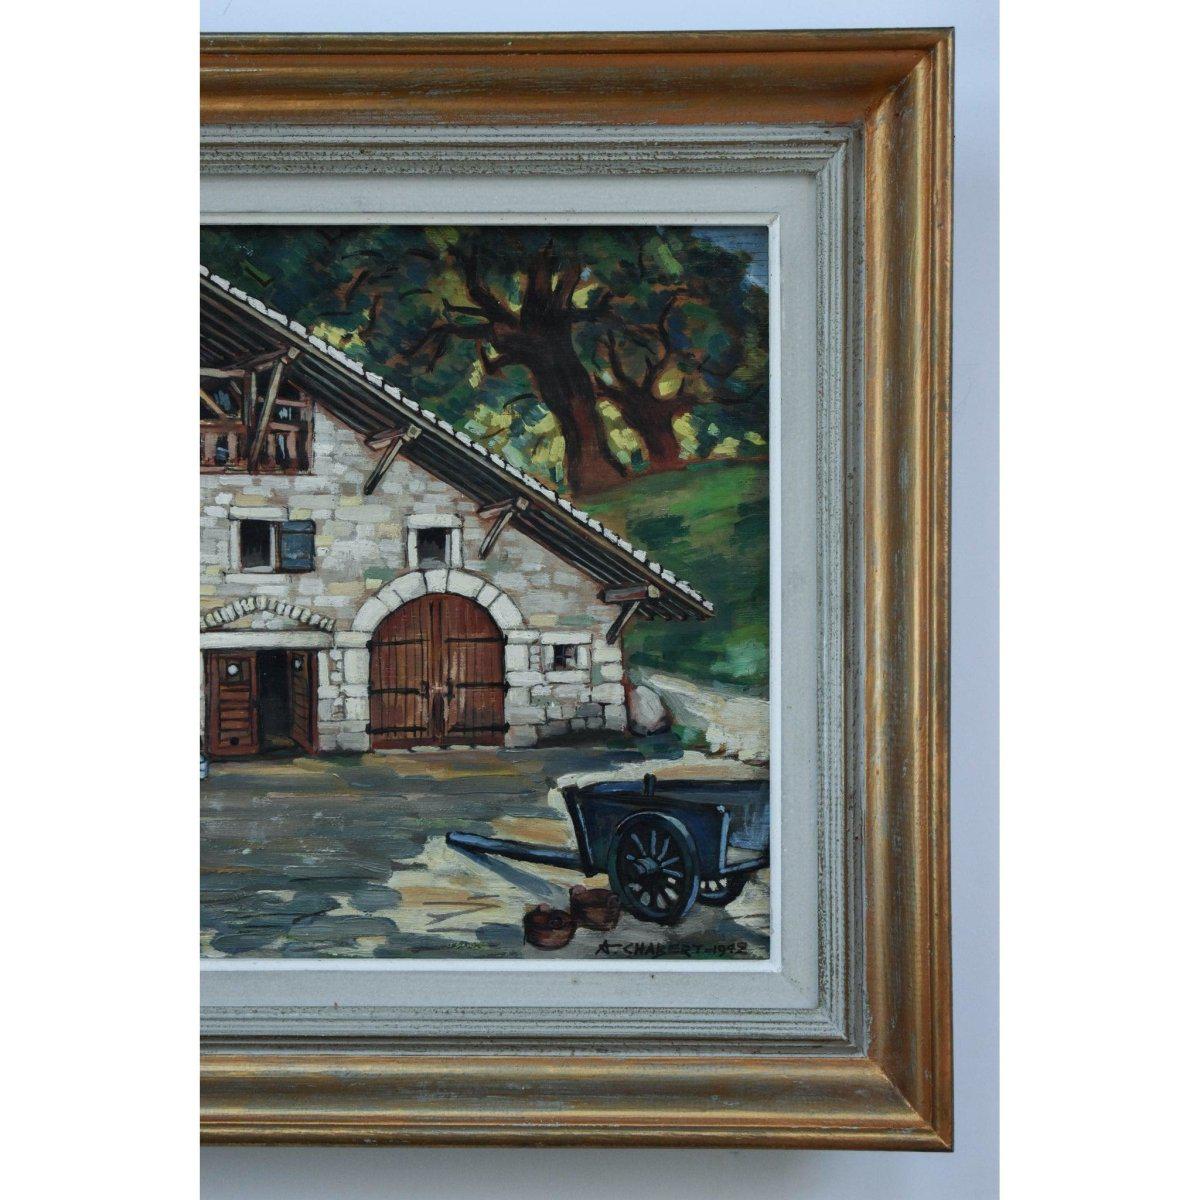 Vintage landscape oil painting French old farm 1942 by André Chabert for sale at Winckelmann Gallery